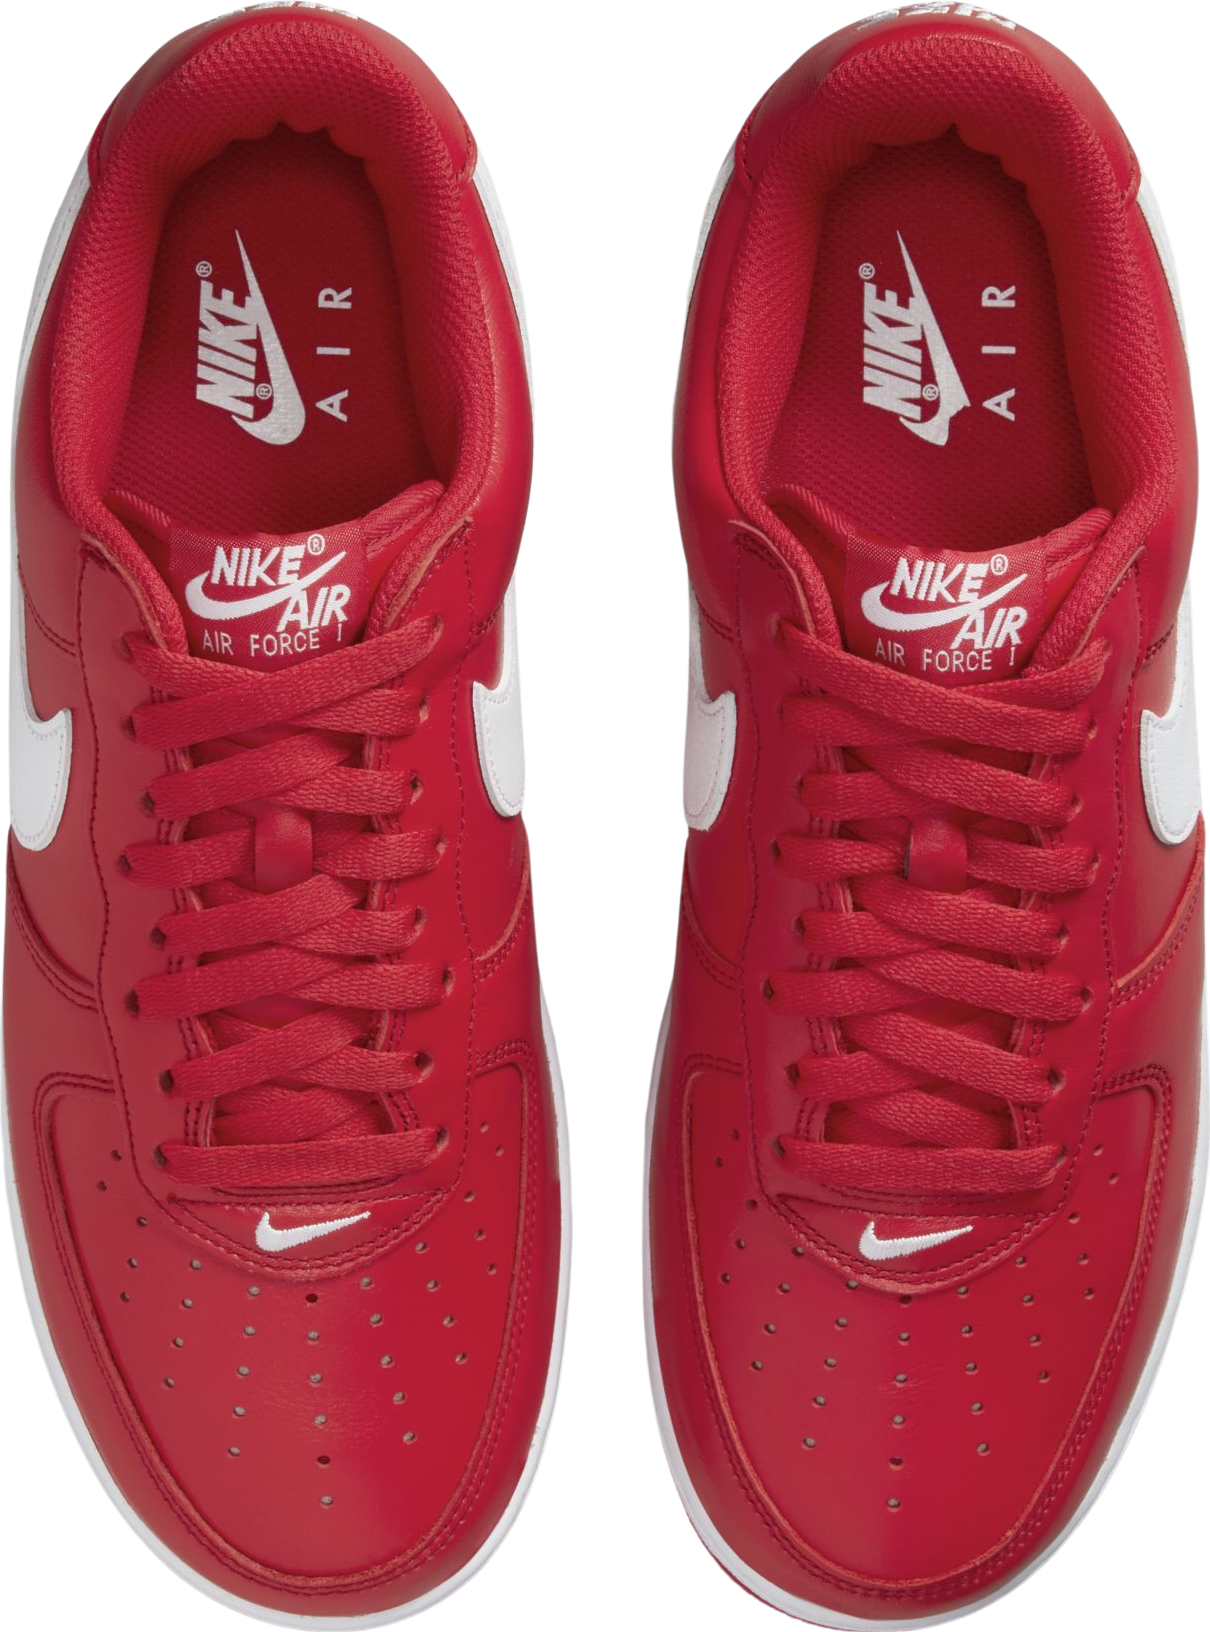 Nike Air Force 1 Low '07 University Red